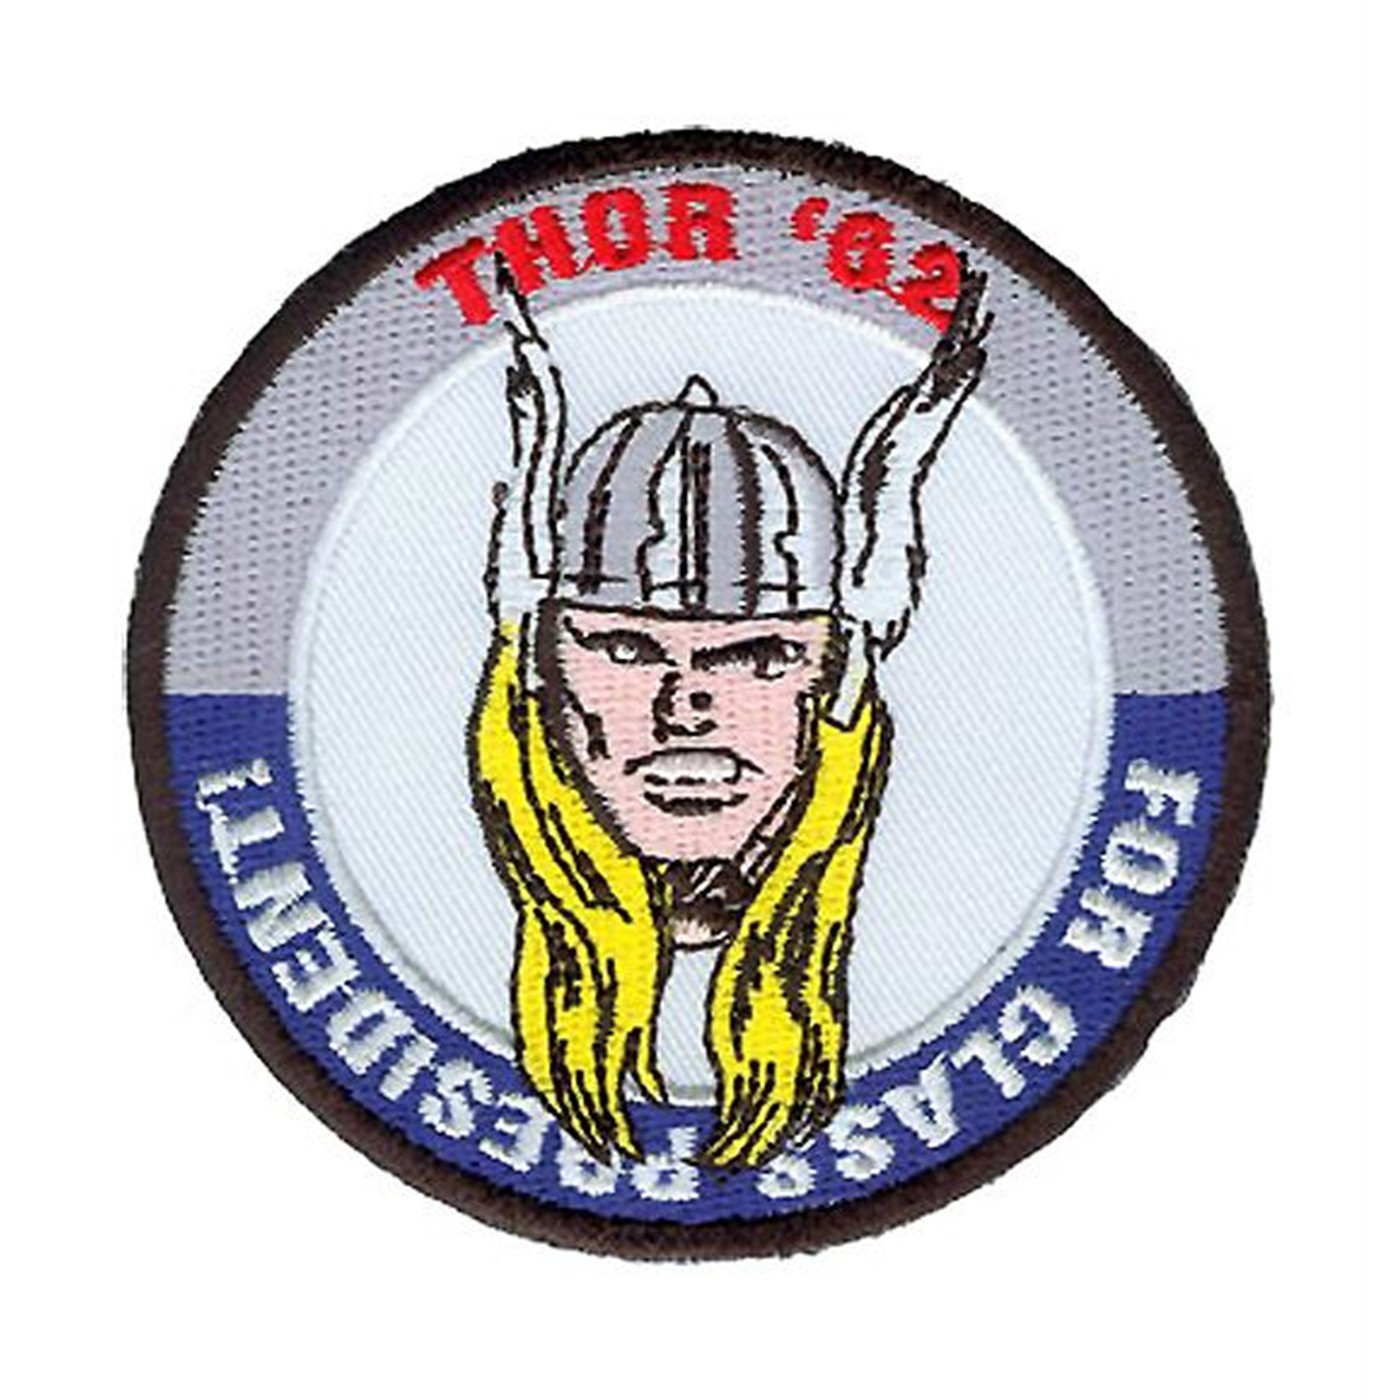 Thor For Class President Patch